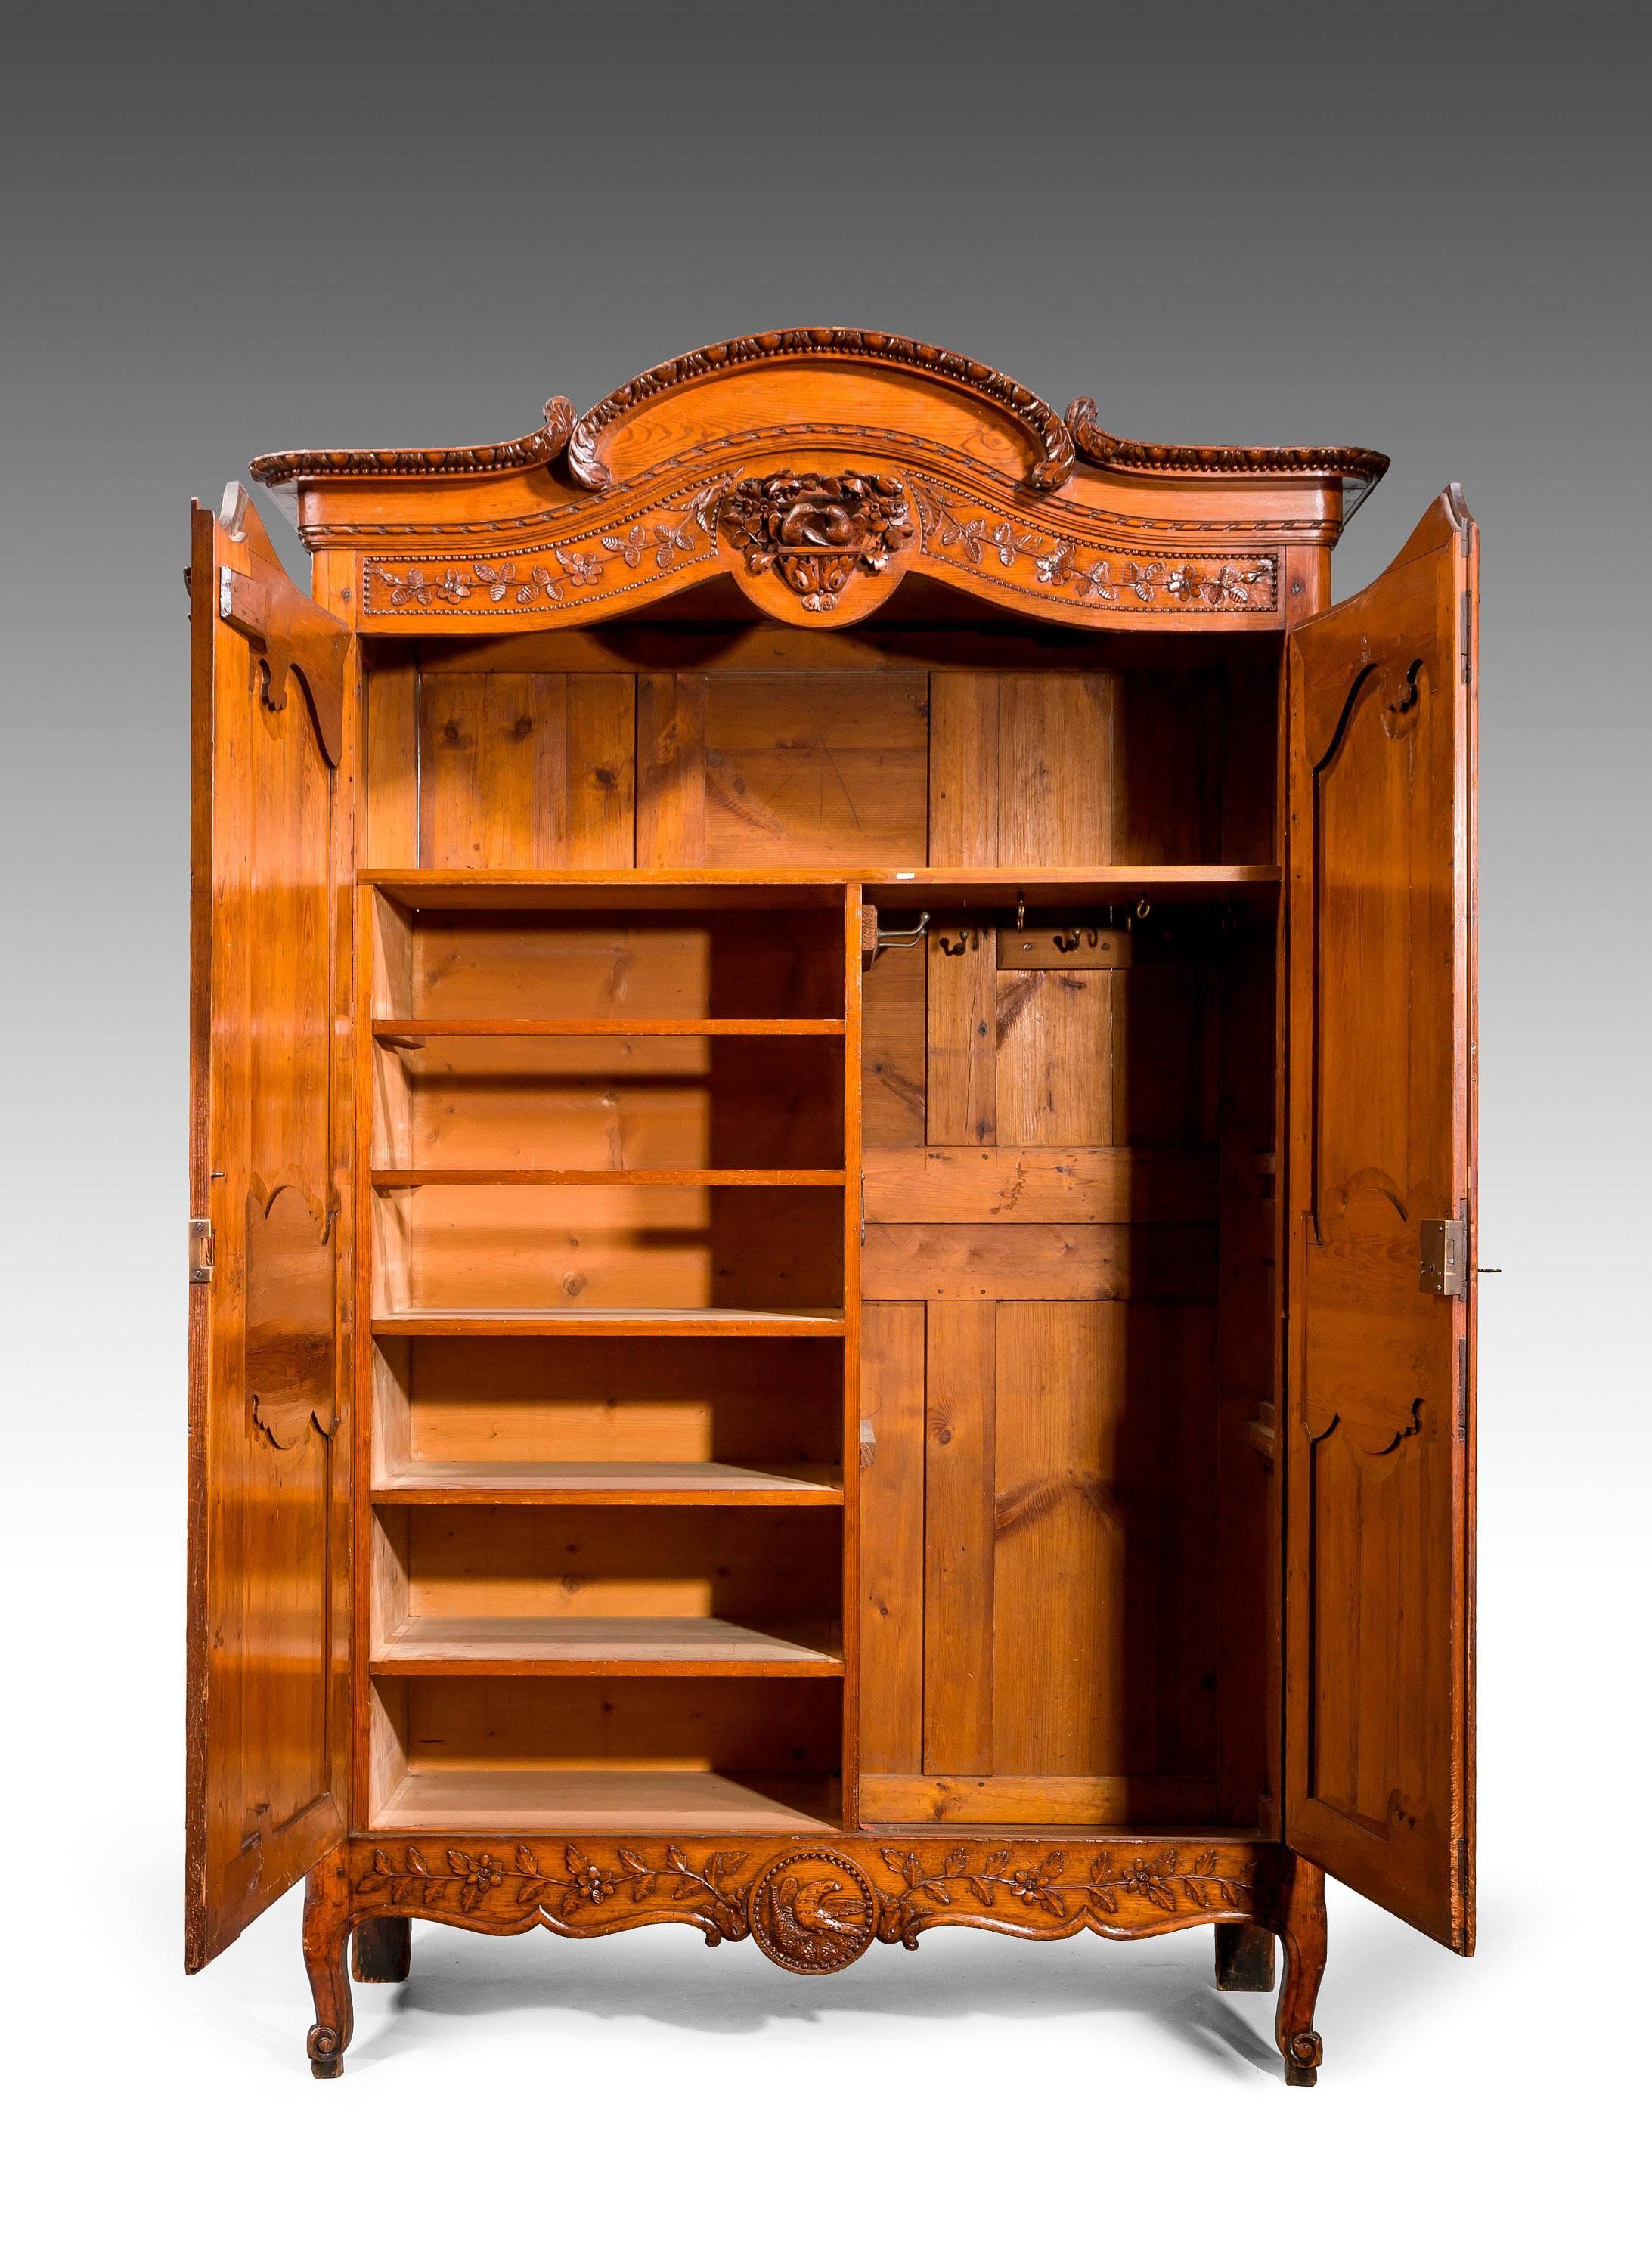 A very finely carved mid-18th century chestnut armoire, the cupboard of exceptional quality and in its fine original condition.